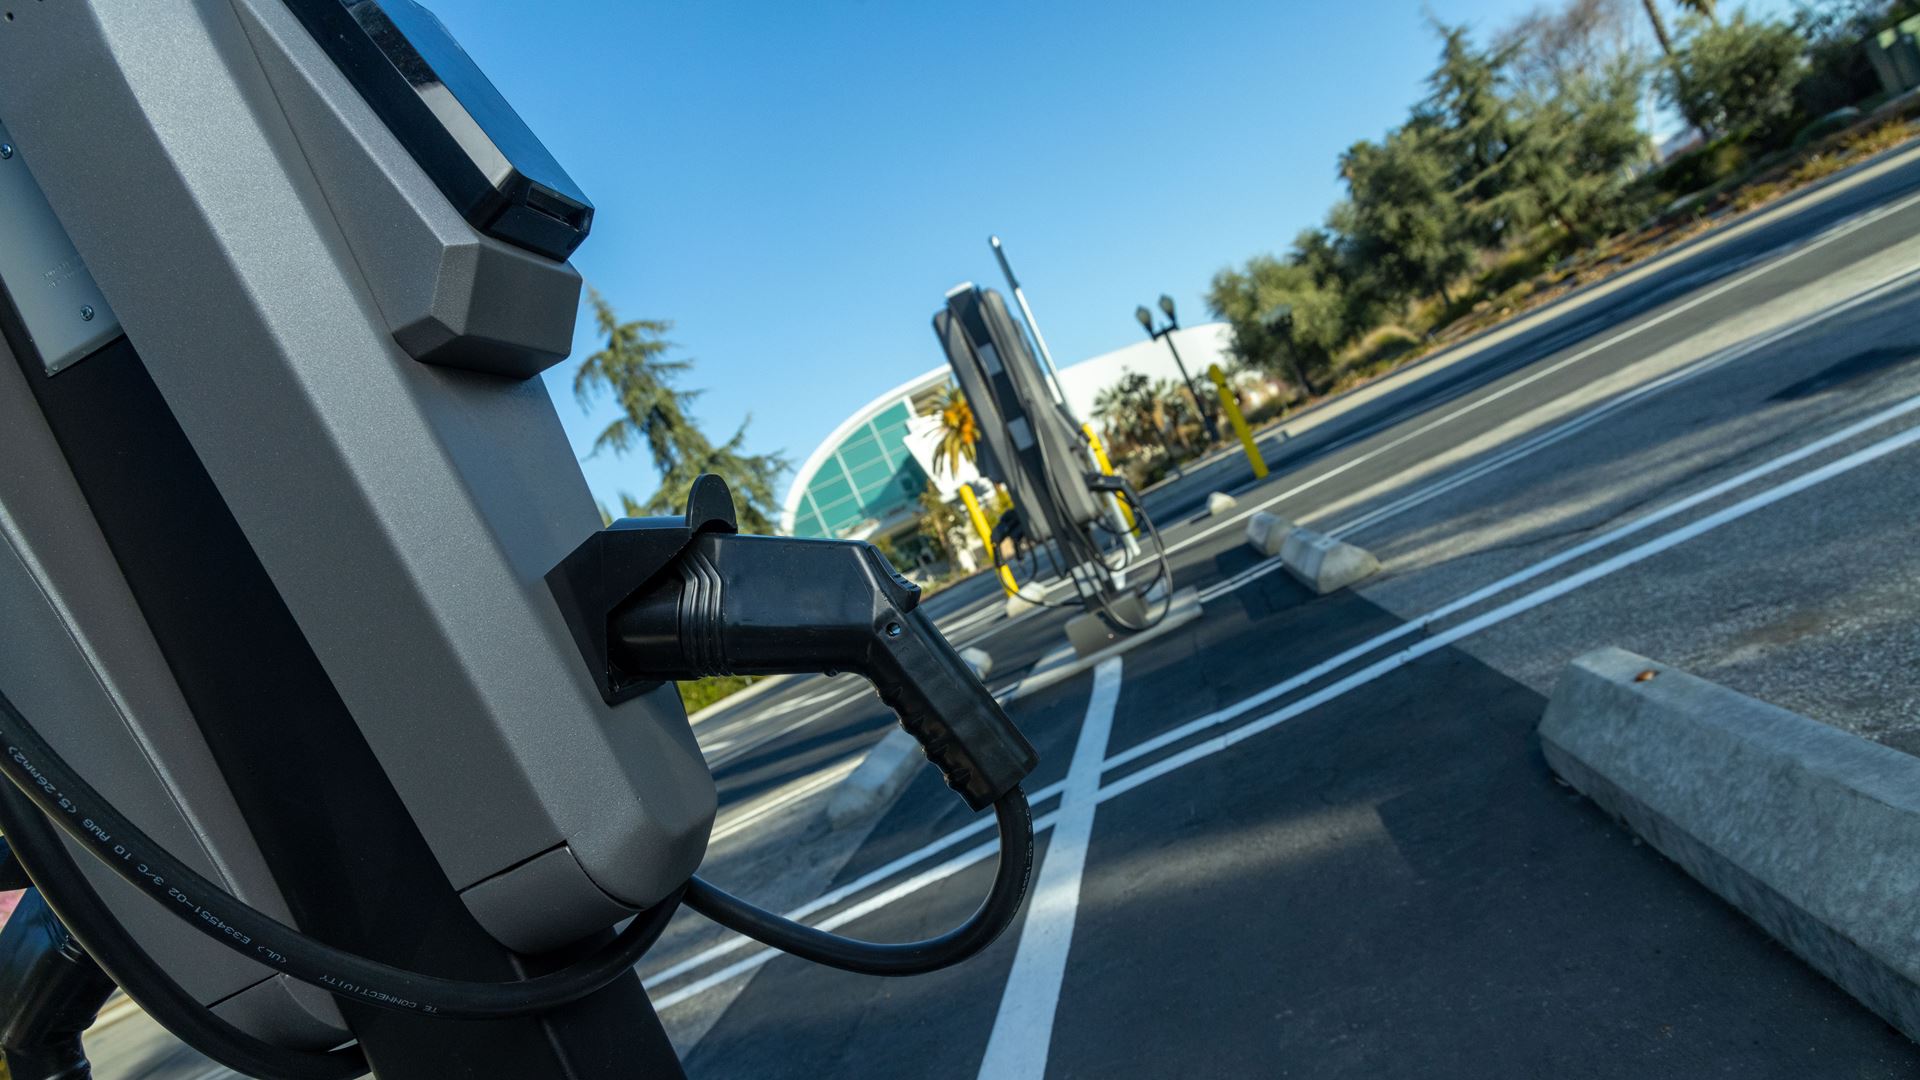 Charge Ready - Southern California Edison Launches U.S. Program to Install 38,000 EV Chargers